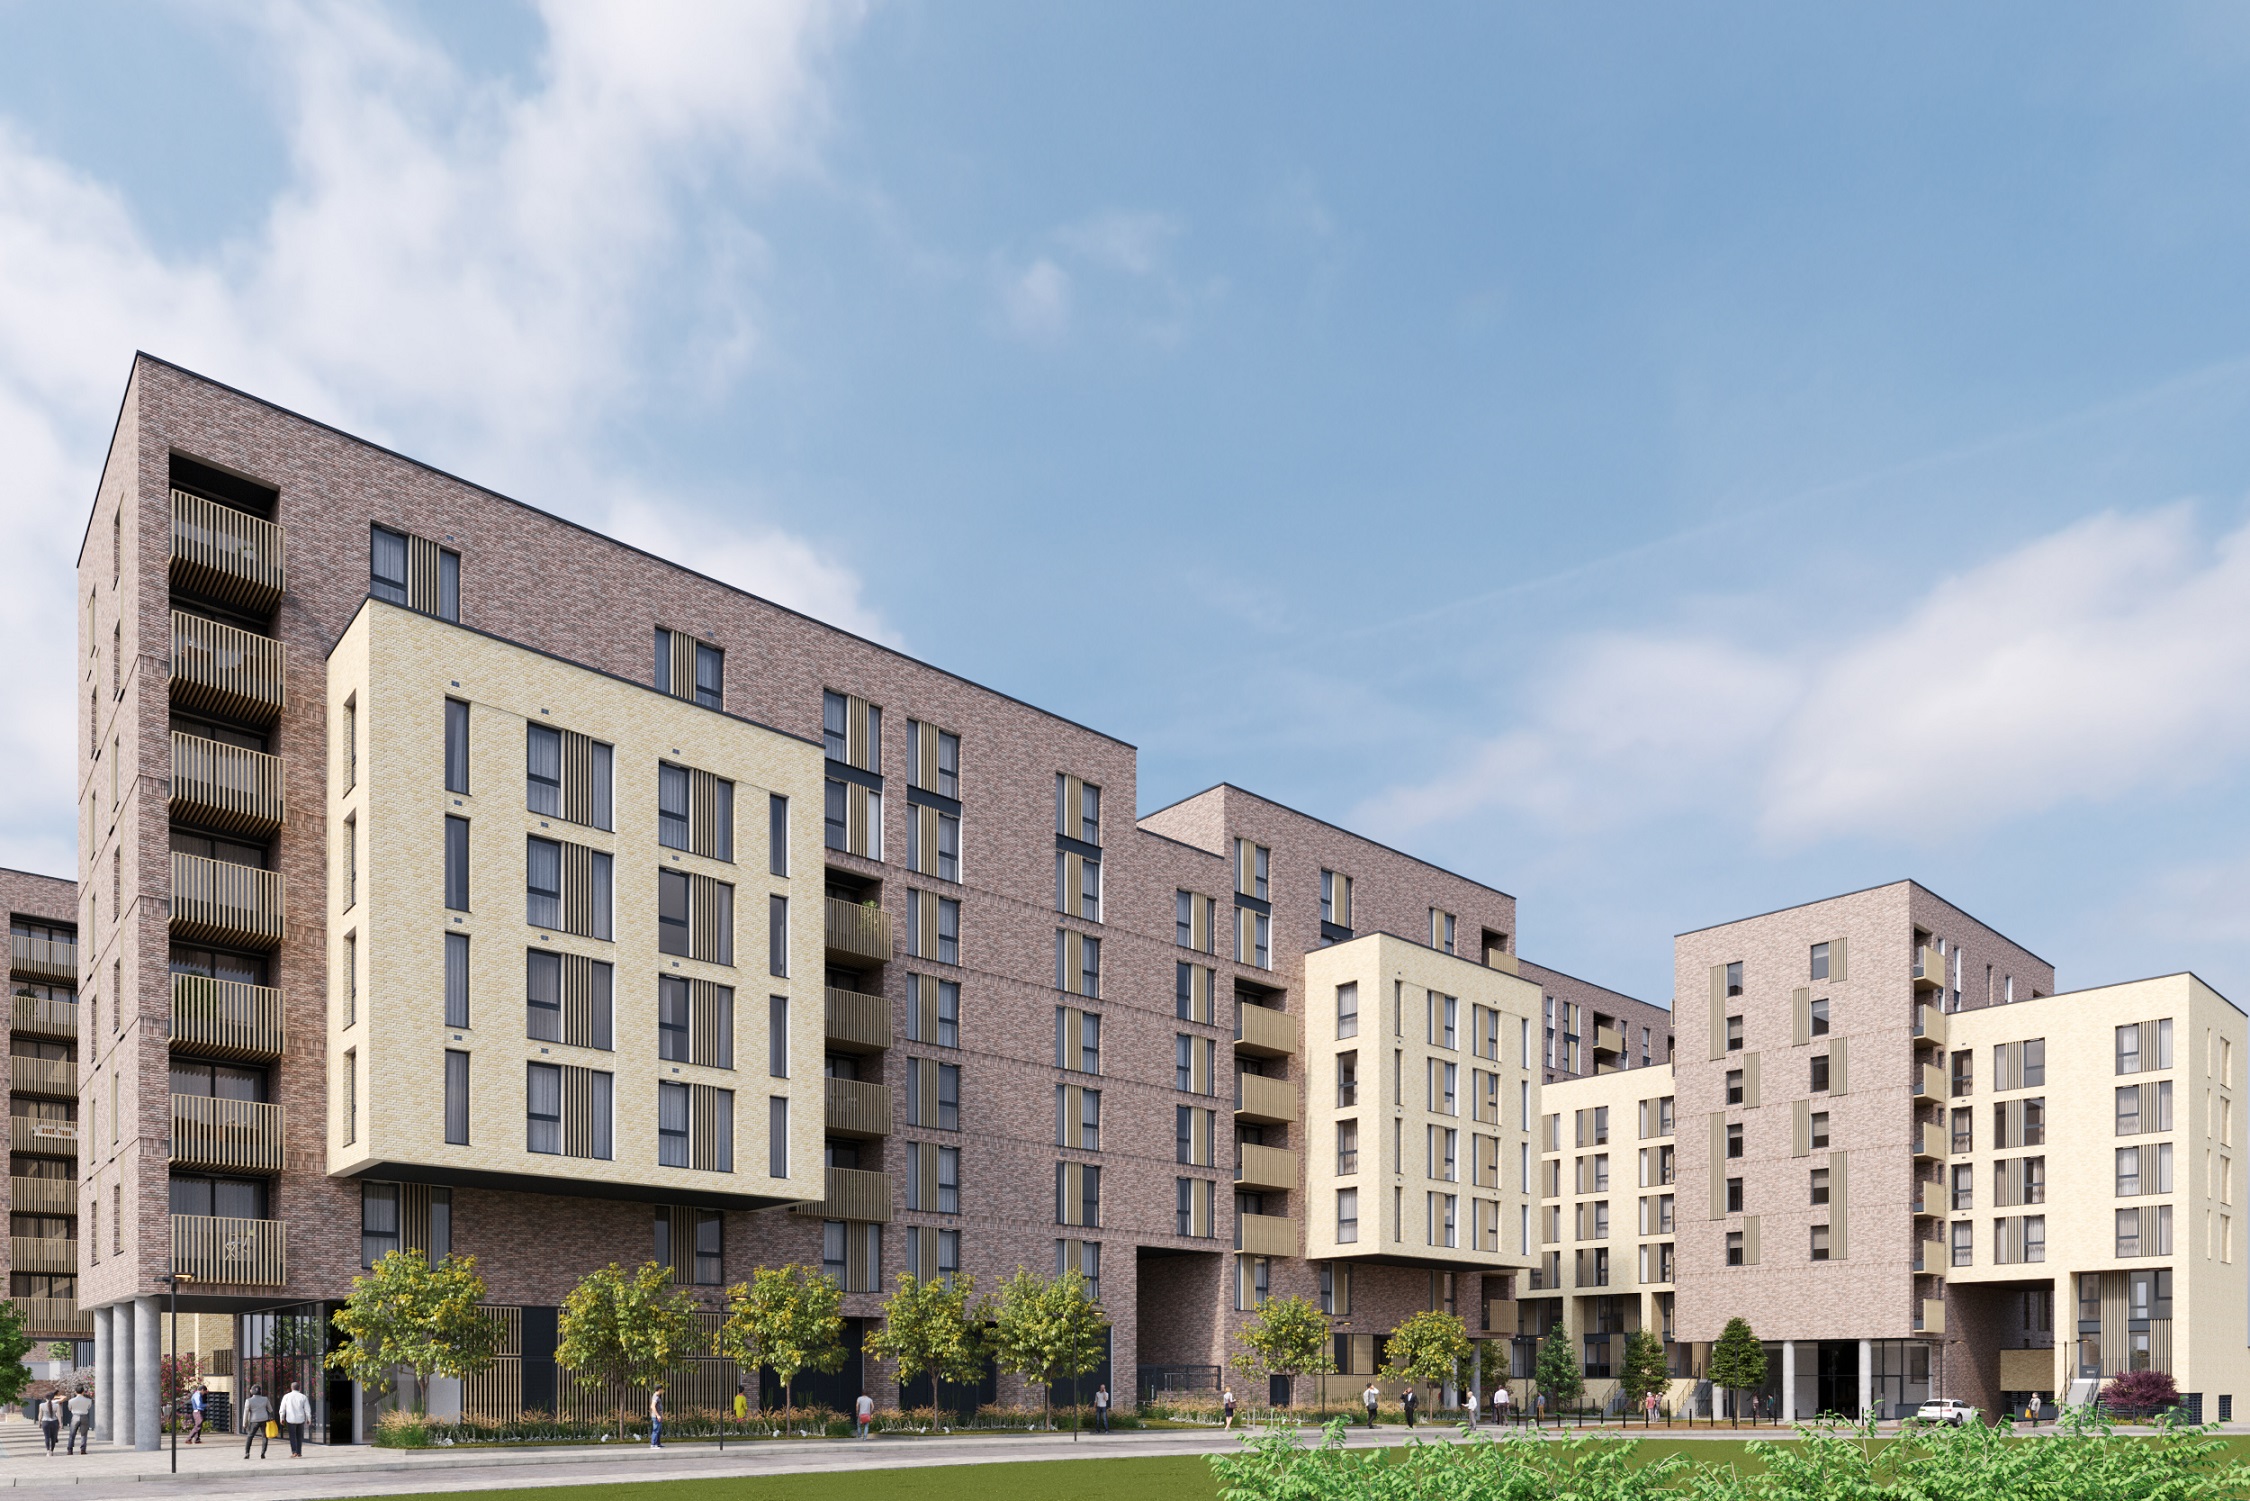 External CGI of The Switch Wimbledon by Catalyst Available on Share to Buy through The Shared Ownership Scheme